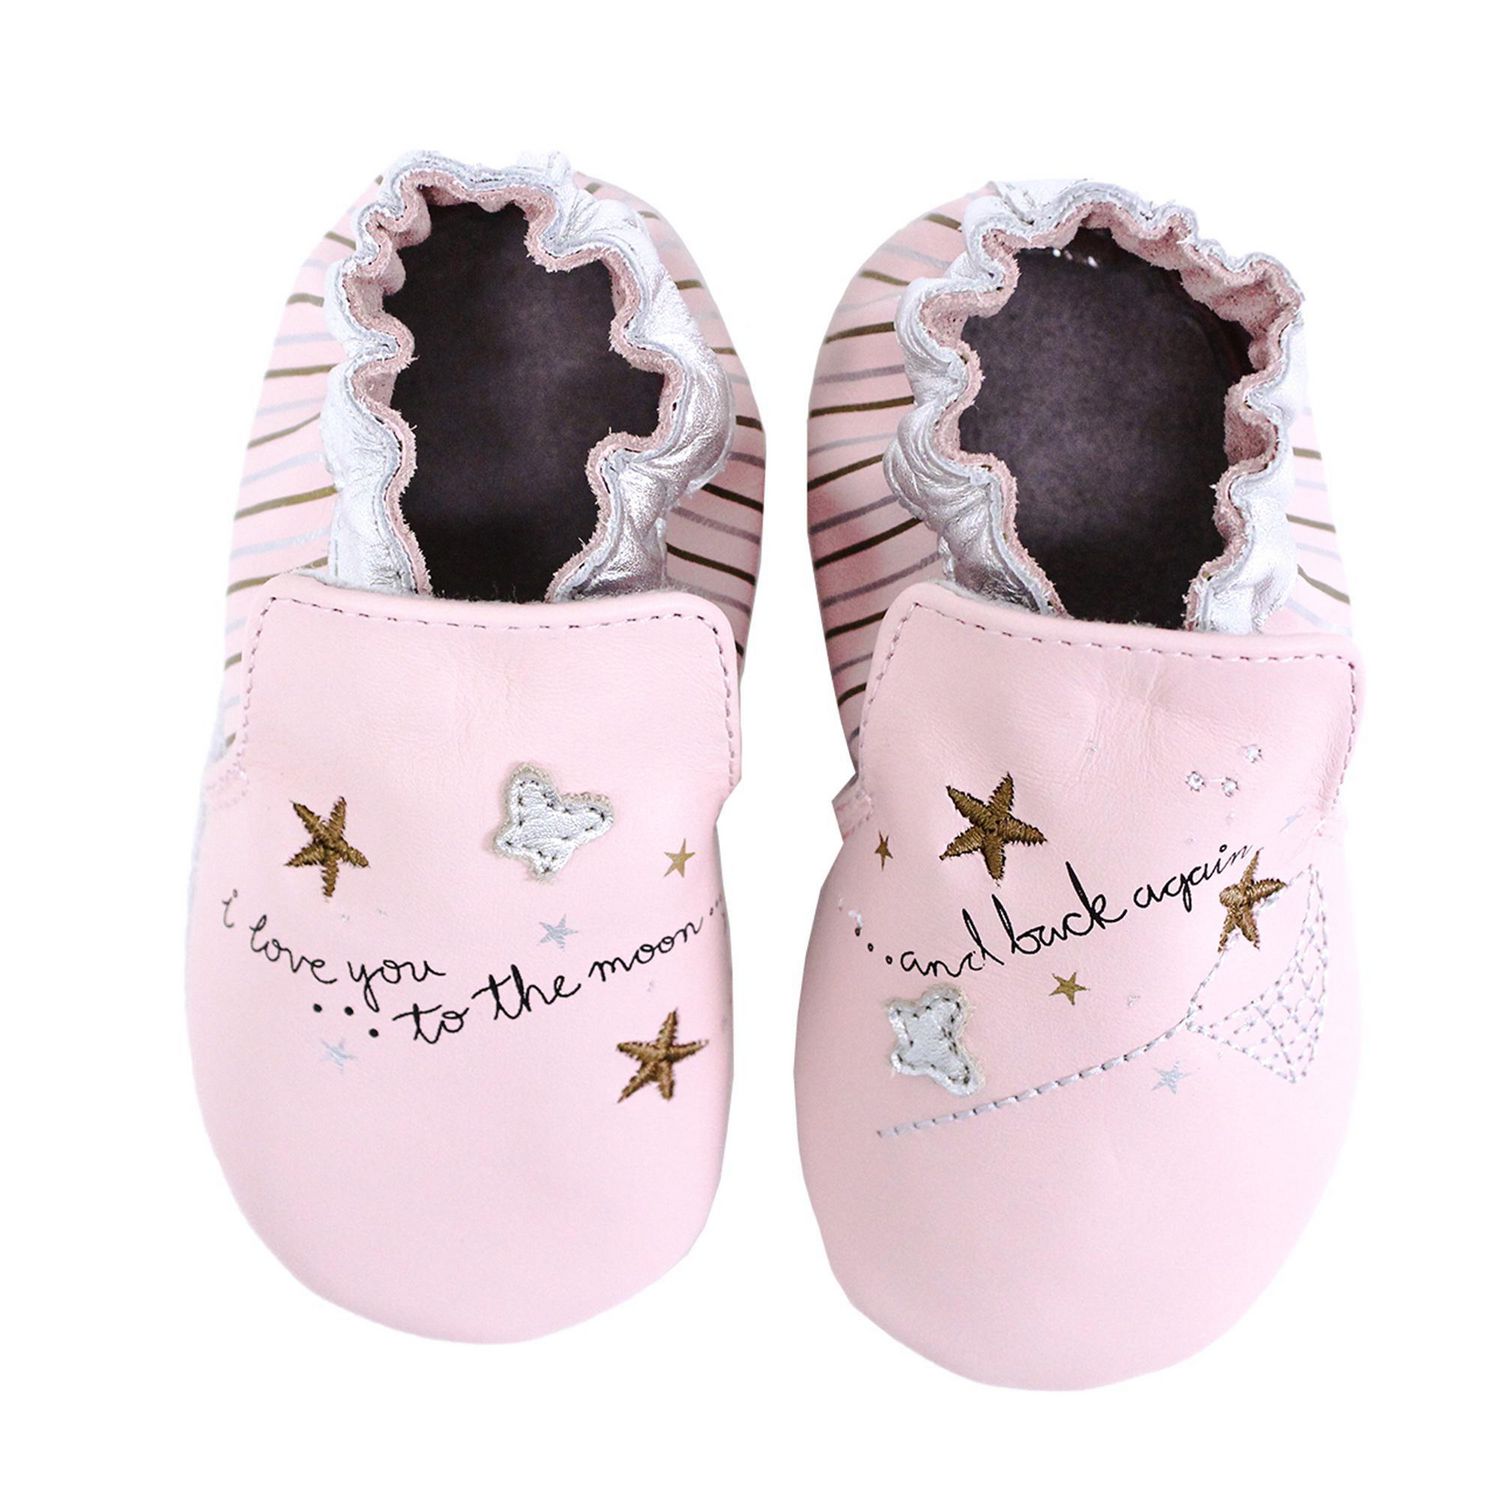 Robeez  Baby Shoes & Clothes Store for Infants & Toddlers